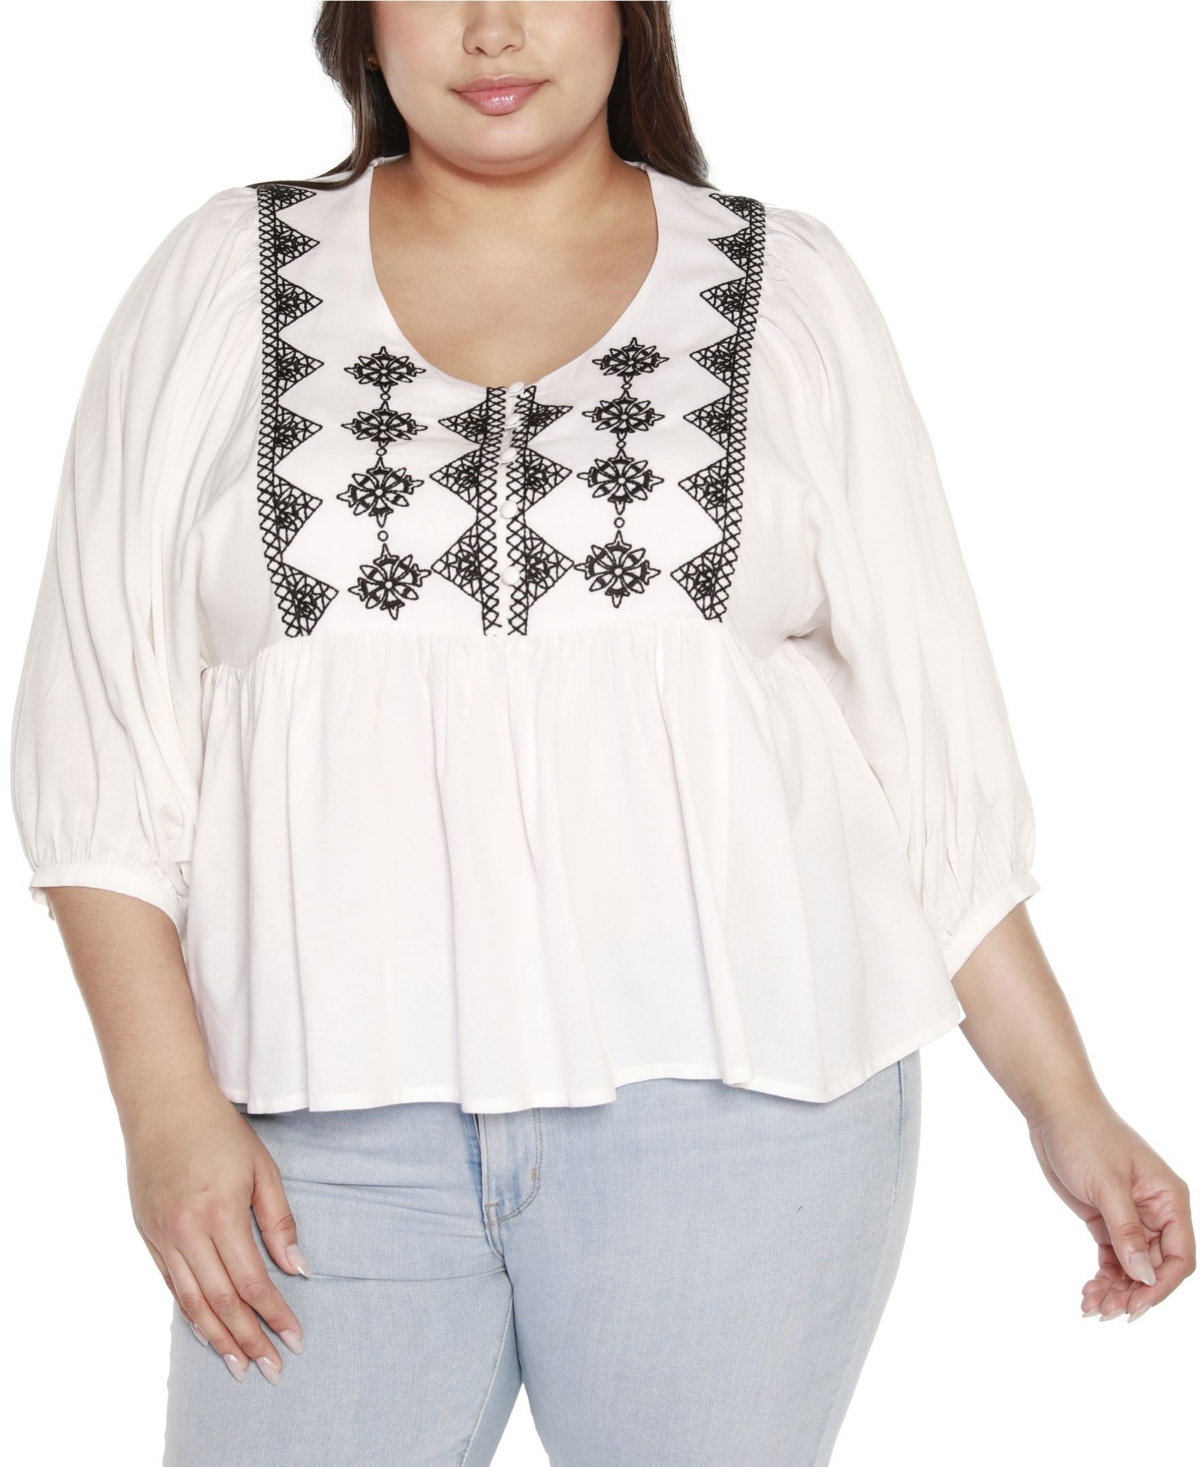 Black Label Plus Size Embroidered Boho Fit and Flare Top - White